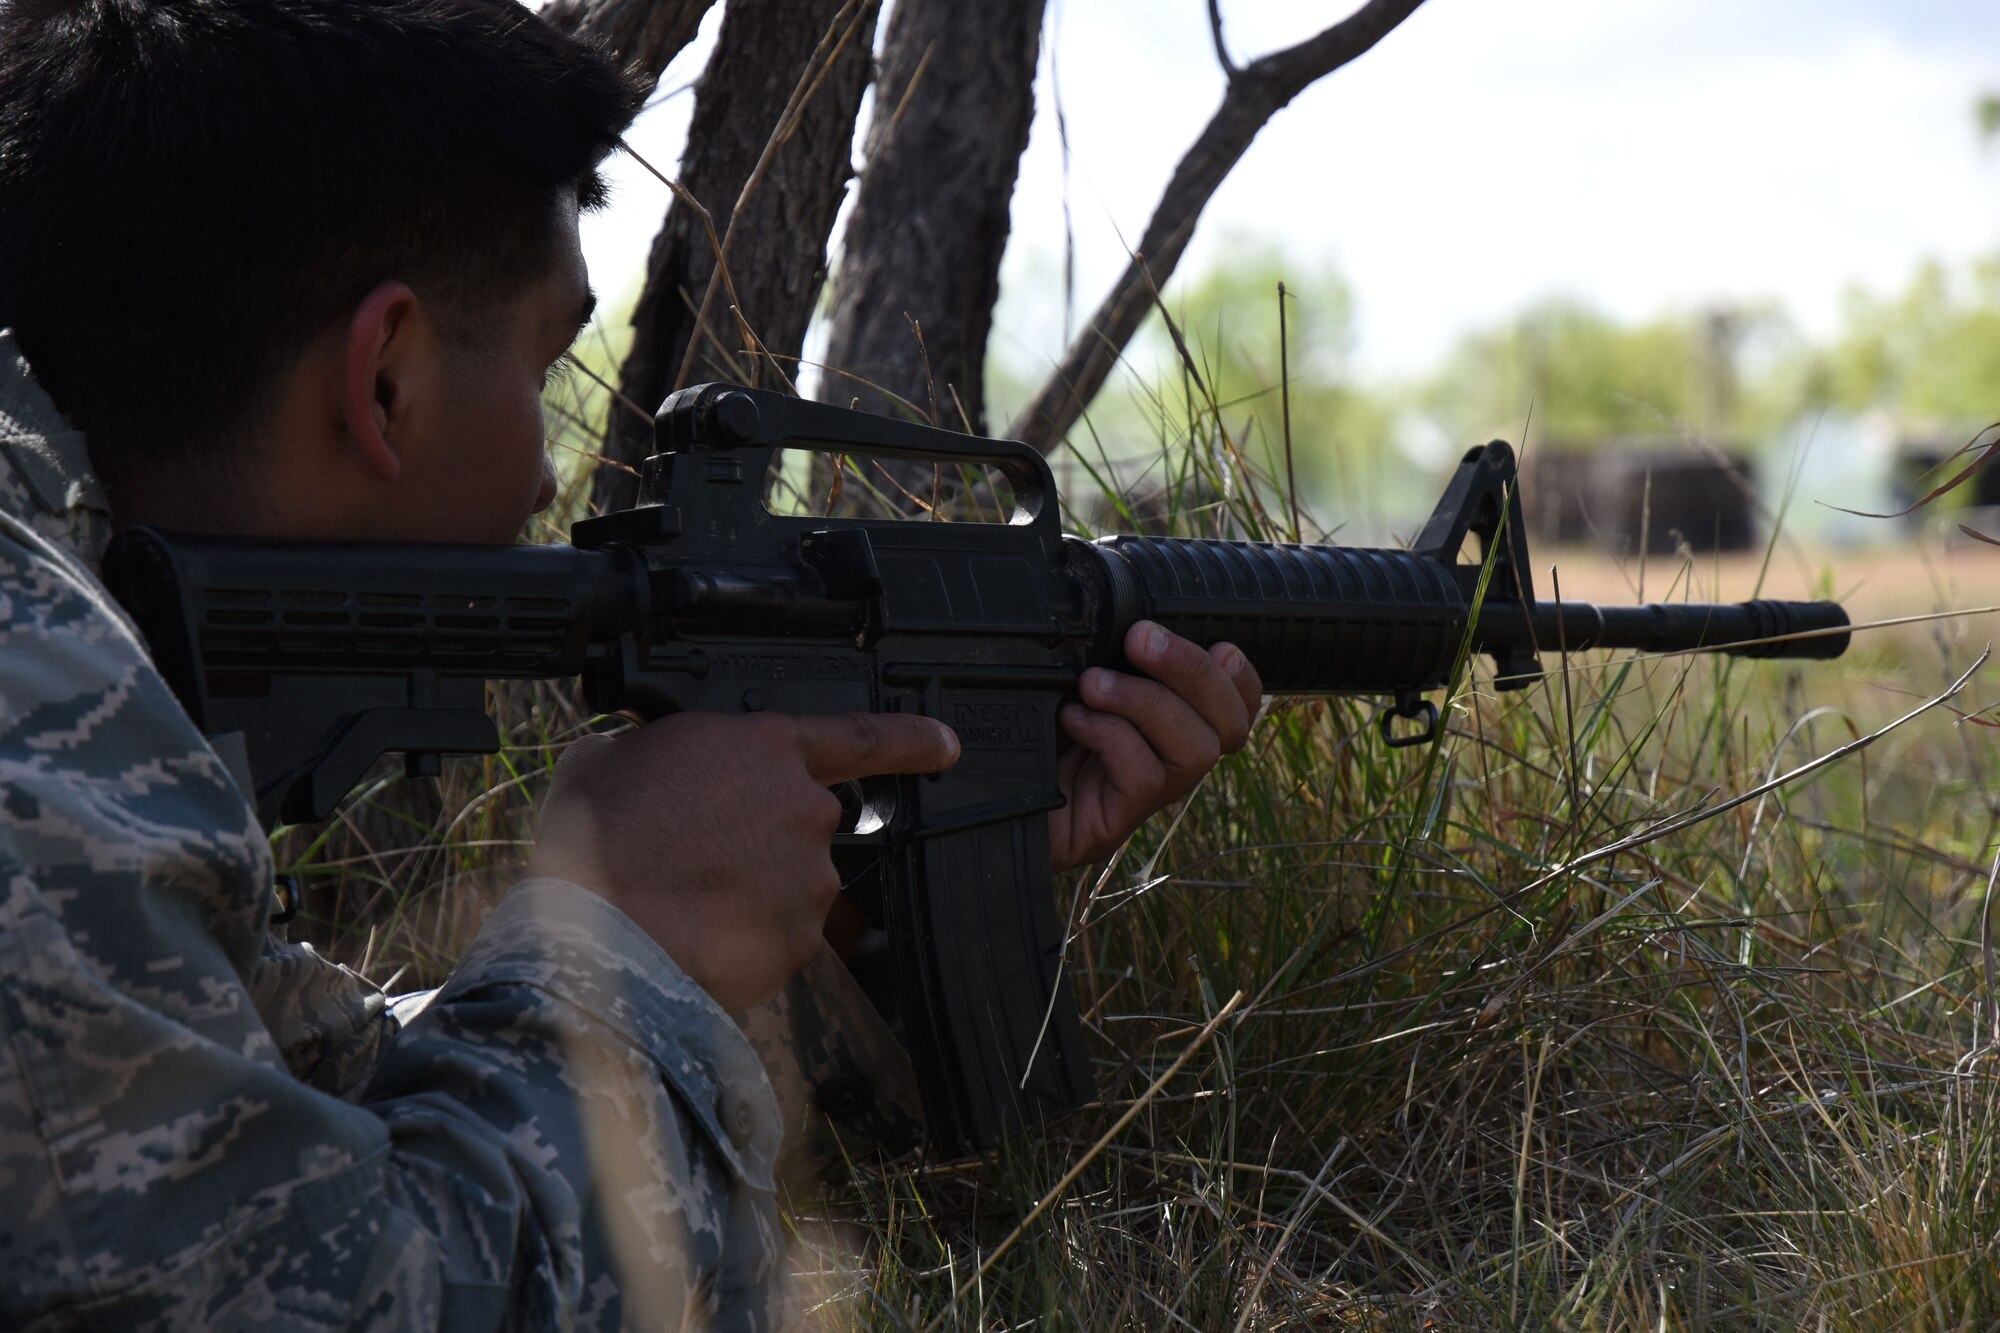 Johnny Martinez, Angelo State University Air Force ROTC cadet, takes cover waiting for his team to move up and accomplish the current objective at the mock forward operating base on Goodfellow Air Force Base, Texas, April 21, 2018. Some objectives involved multiple fire teams where the cadets had to organize and coordinate through communication skills taught earlier. (U.S. Air Force photo by Airman 1st Class Seraiah Hines/Released)